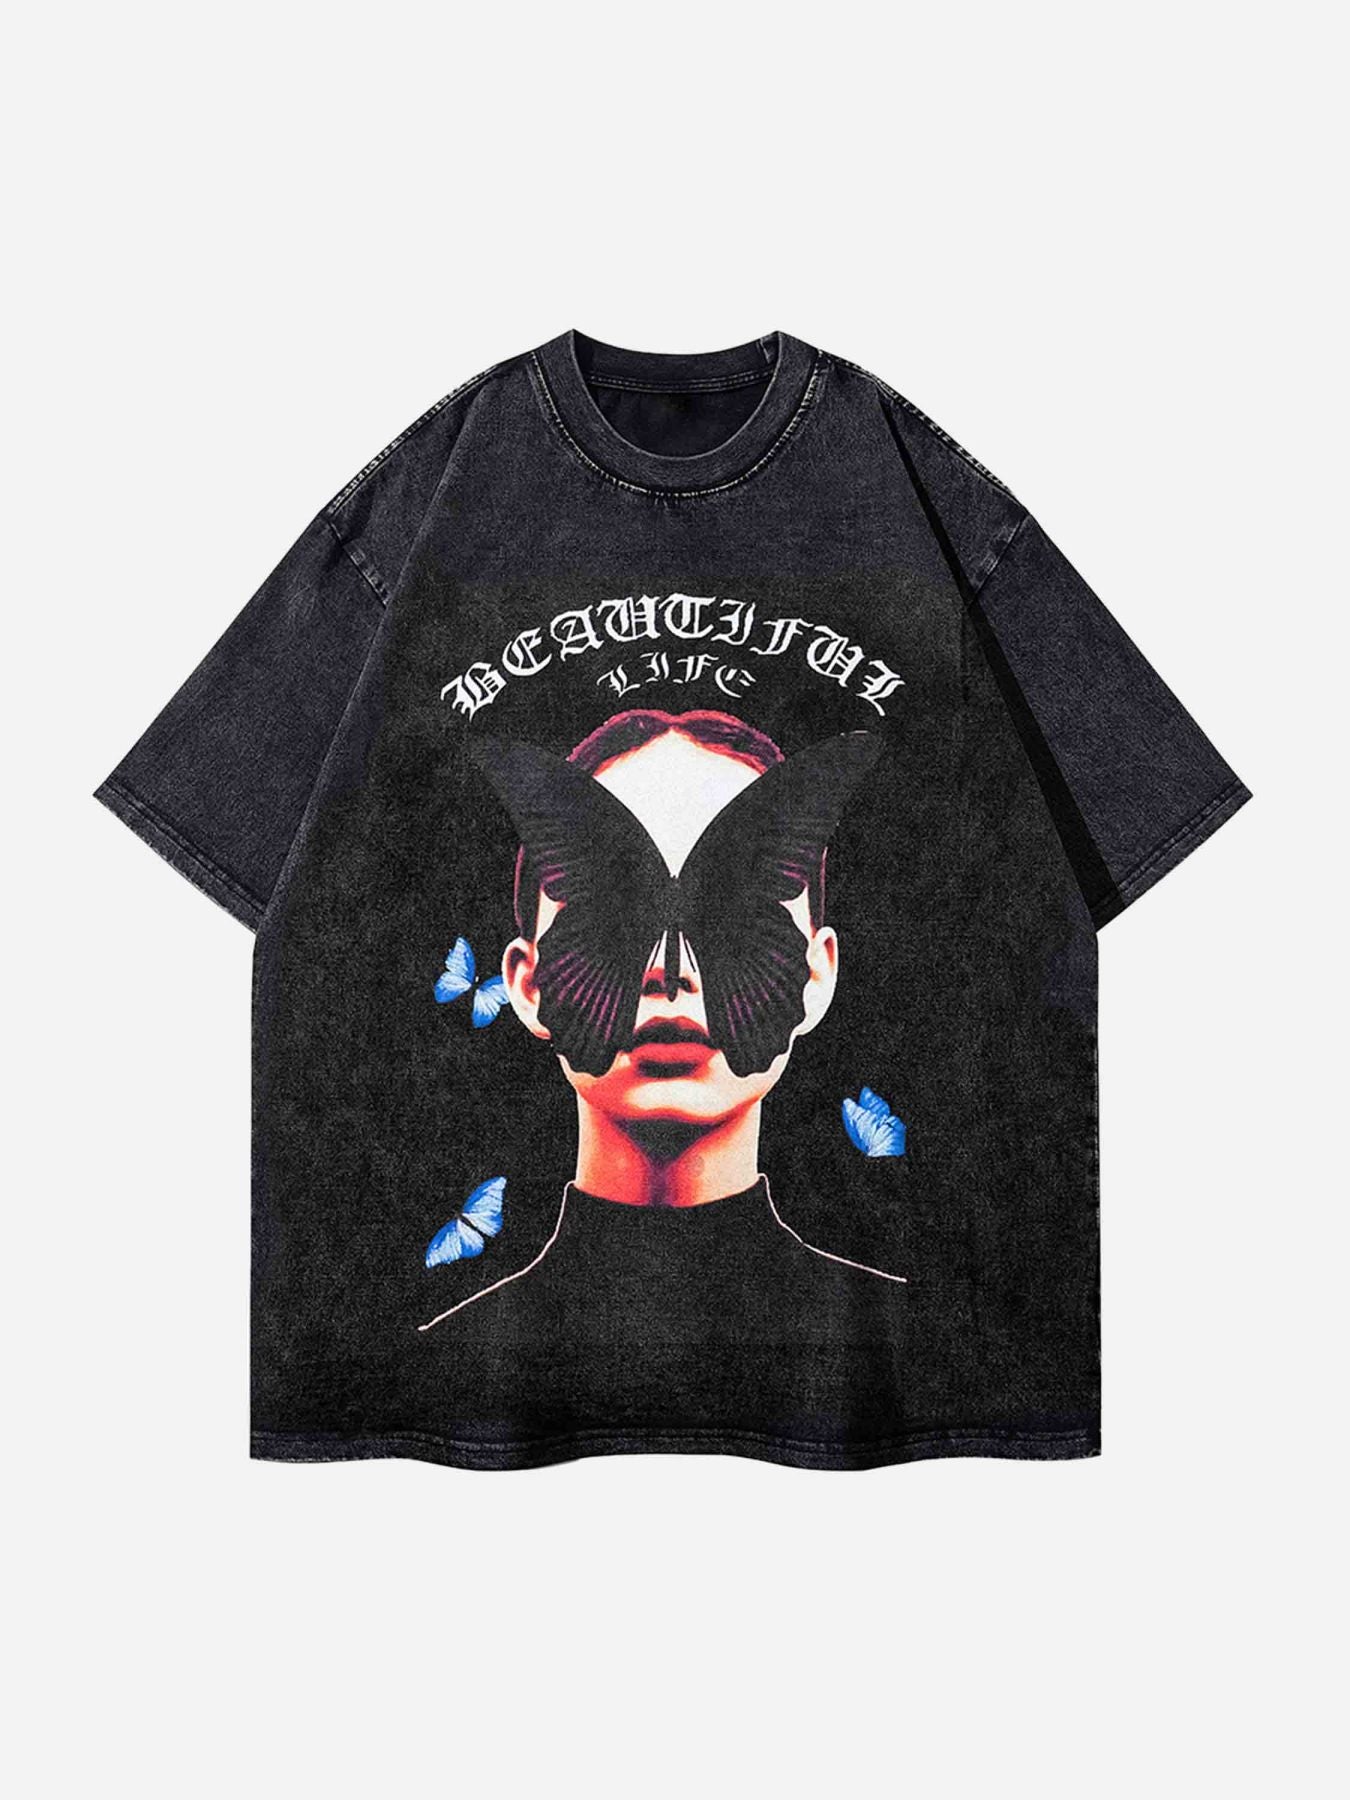 Thesupermade Black Butterfly Girl T-shirt